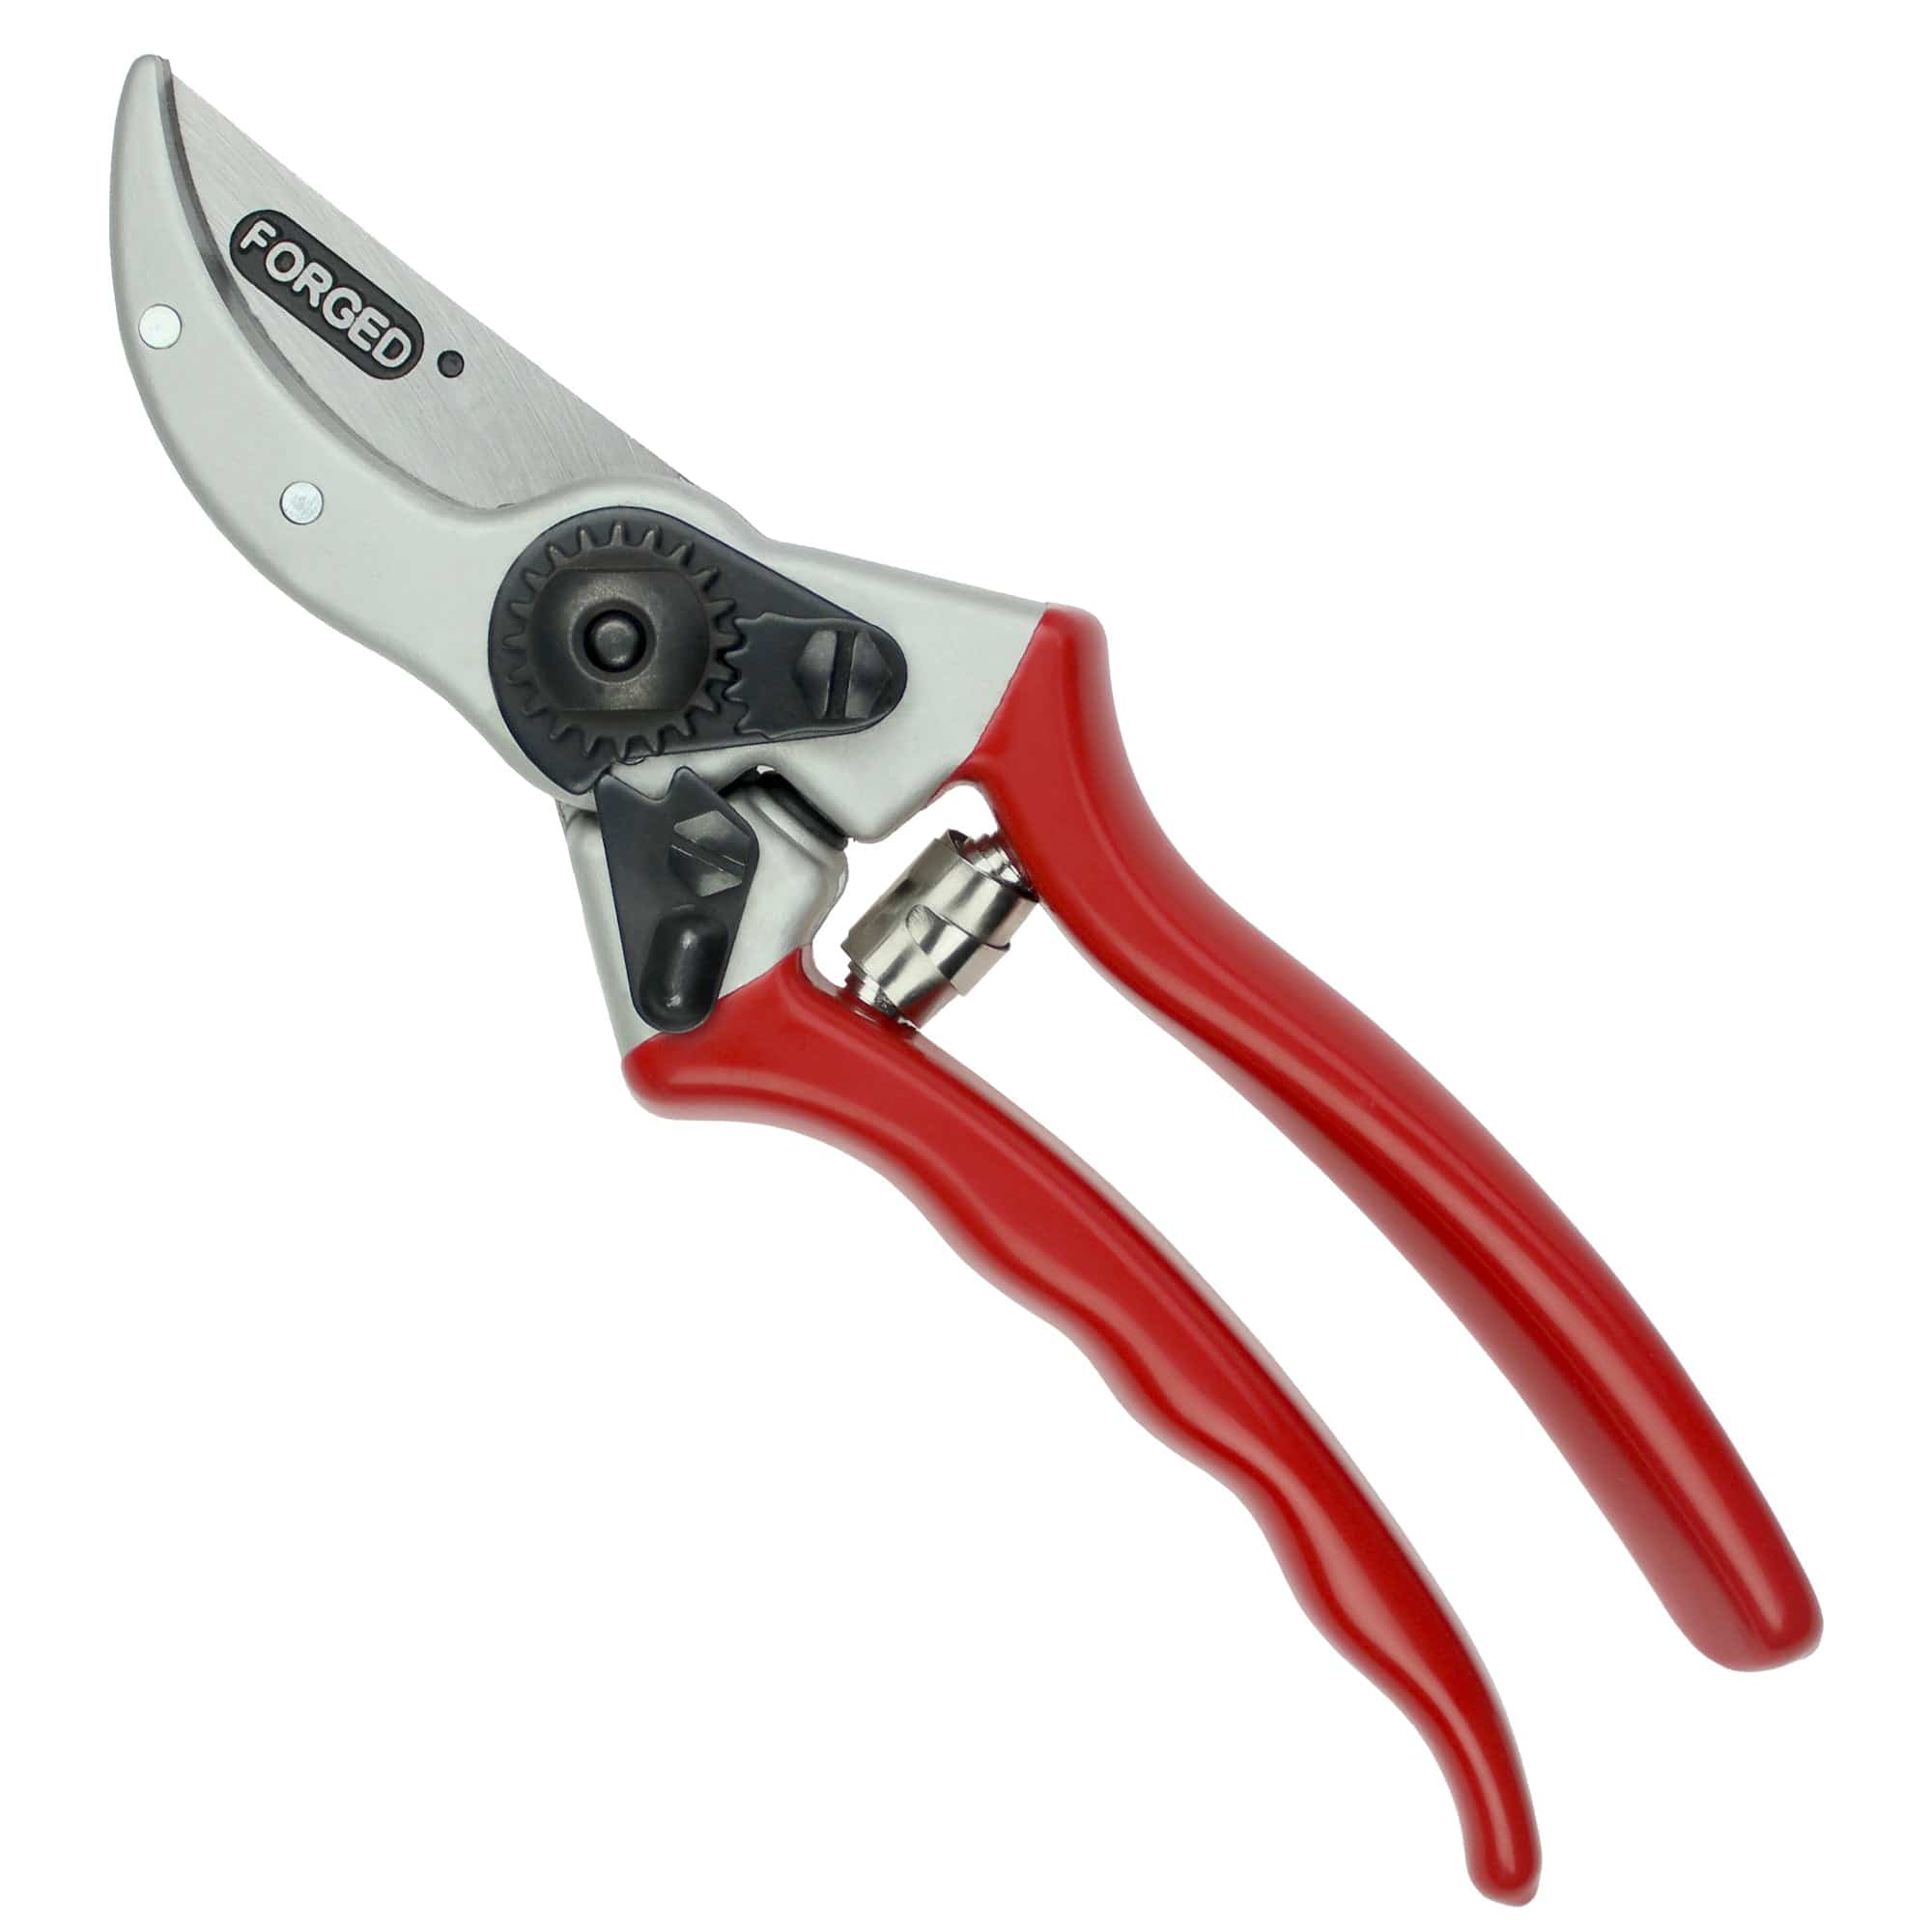 dt-brown HARDWARE Darlac Expert Drop Forged Secateurs